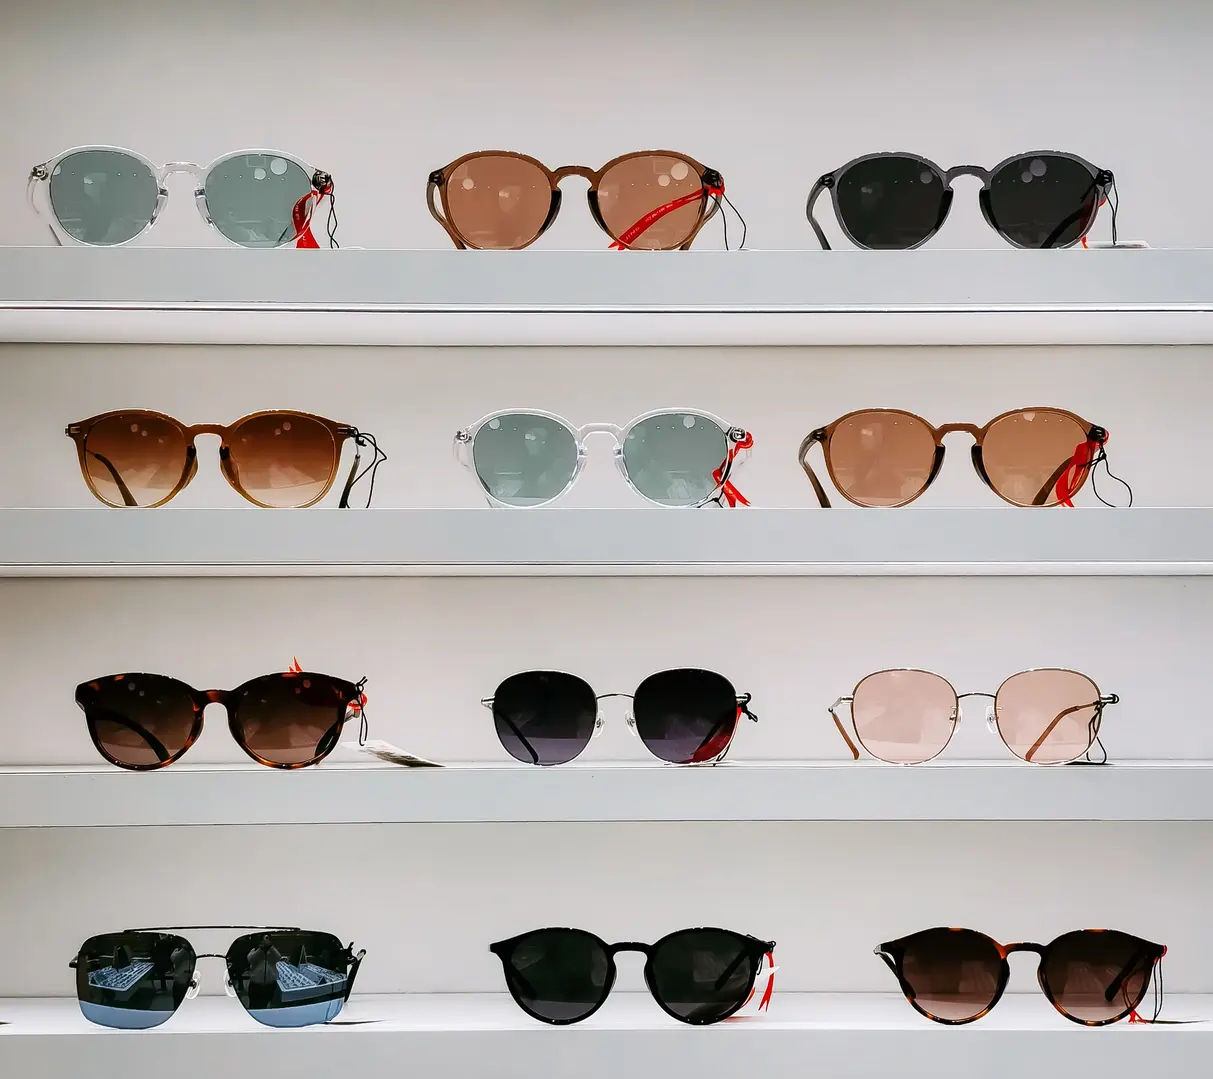 UV Protection: Why Sunglasses Are Essential for Your Eyes